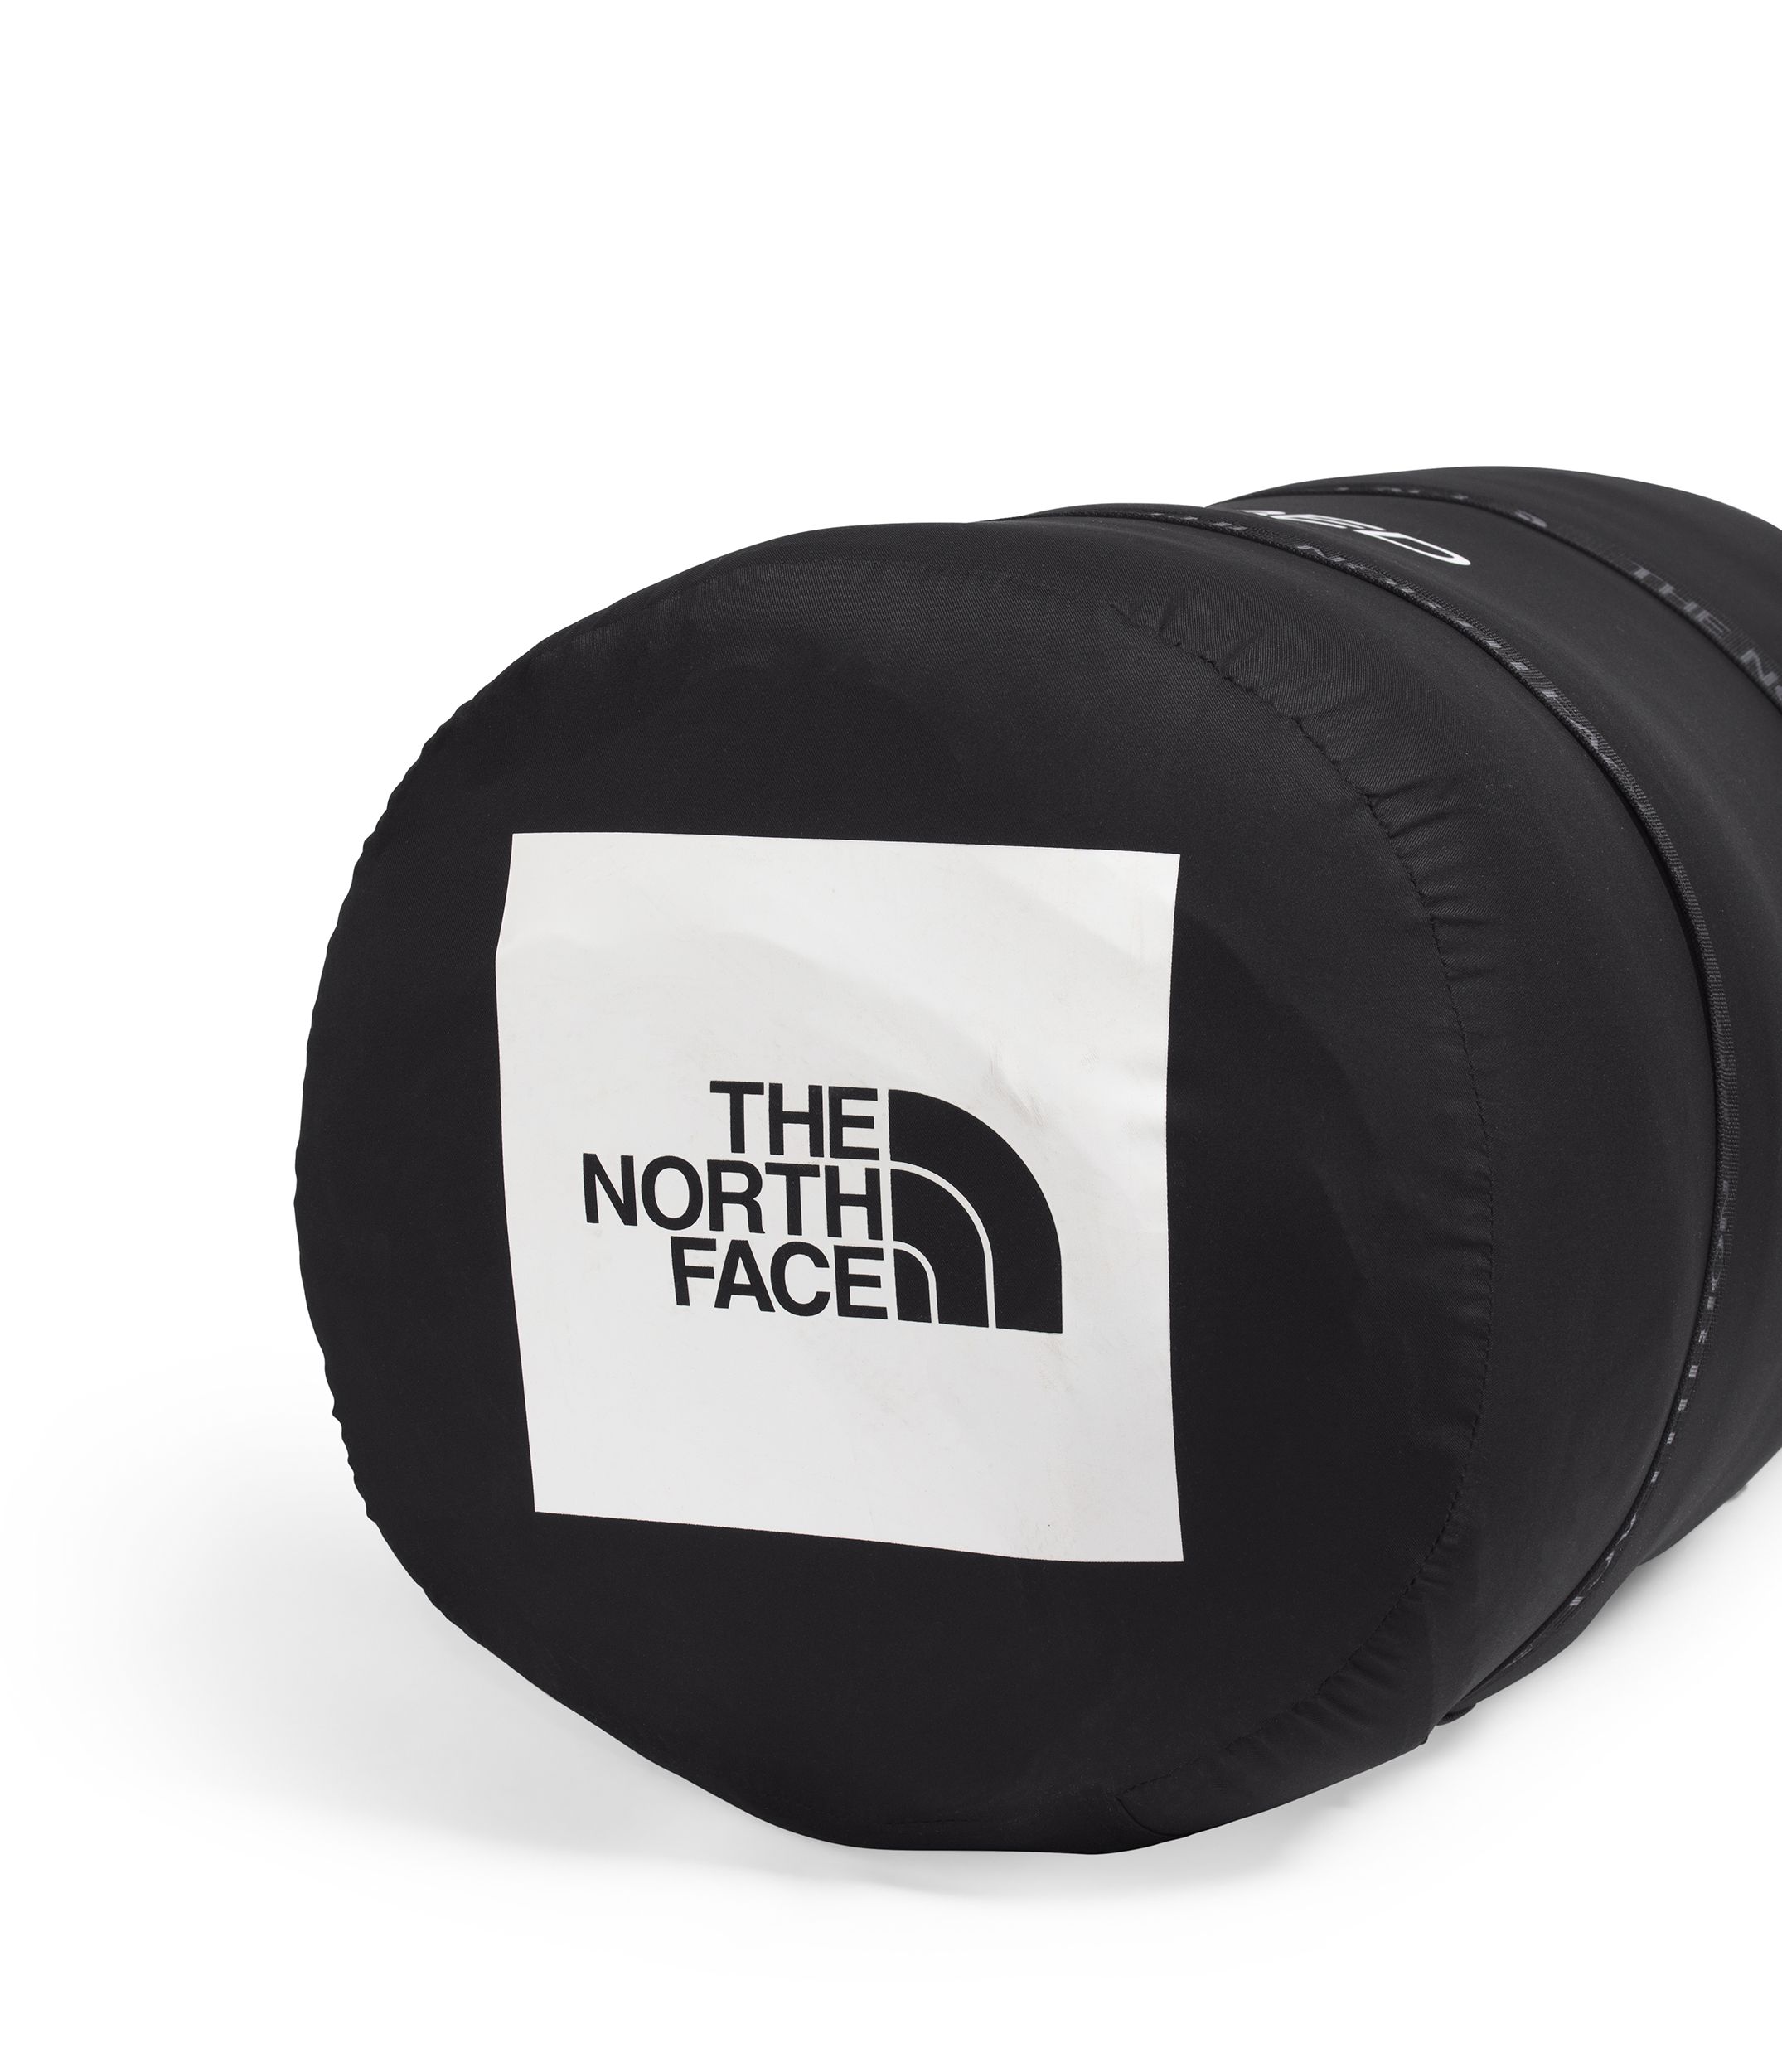 The North Face One Bed Regular Sleeping Bag | Atmosphere